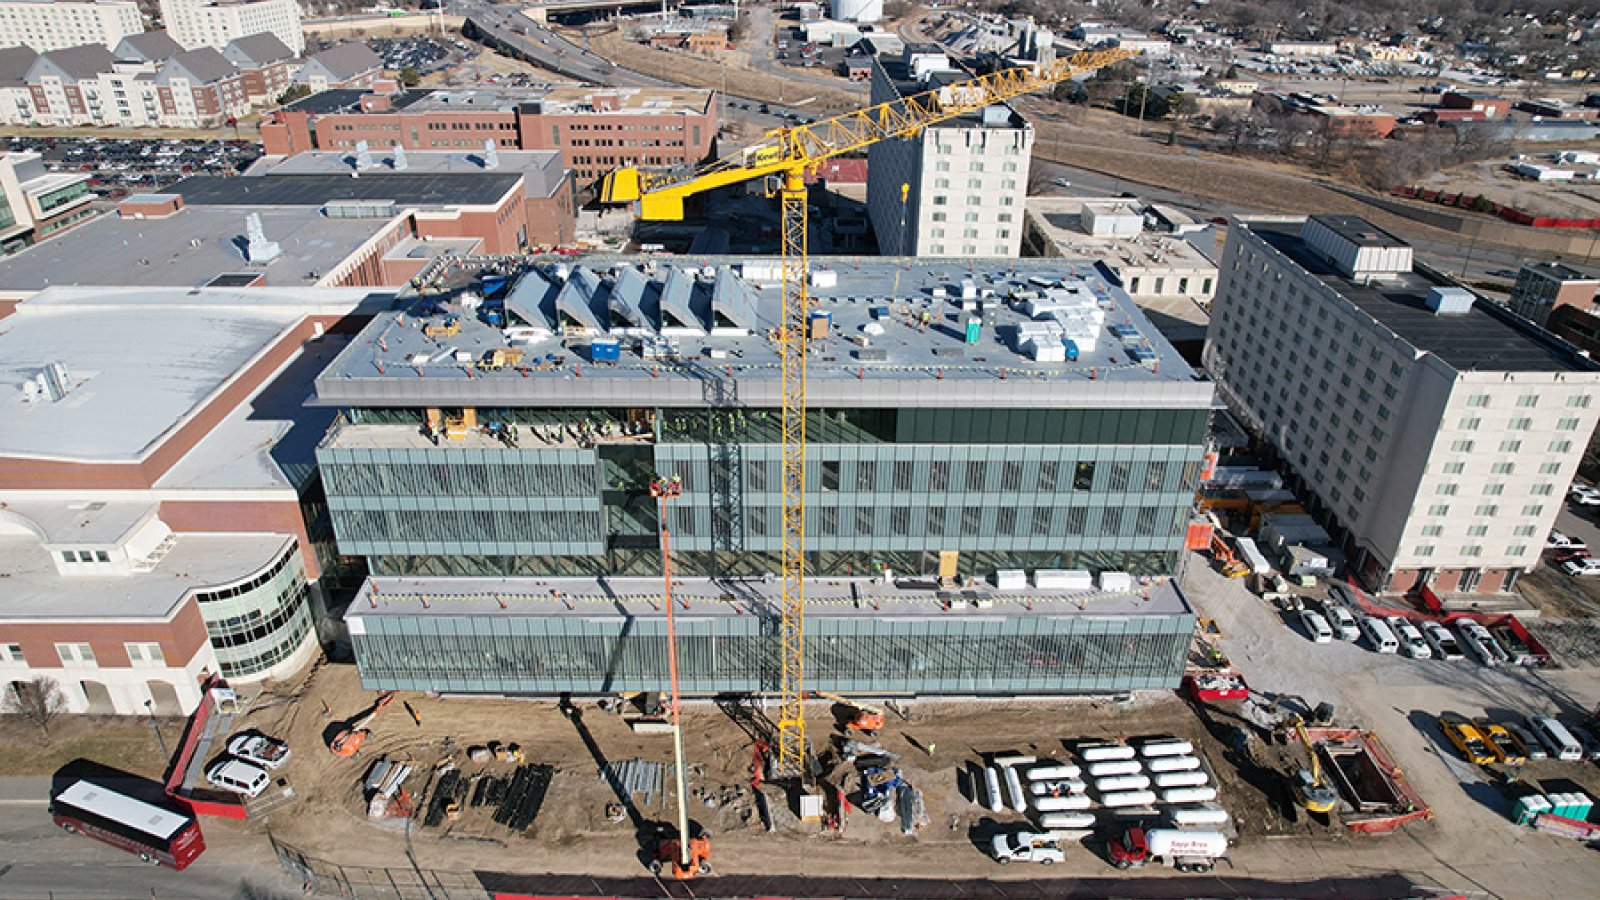 Though not scheduled to open until early 2024, Kiewit Hall takes its place as what University of Nebraska President Ted Carter called one of City Campus' "landmarks." 